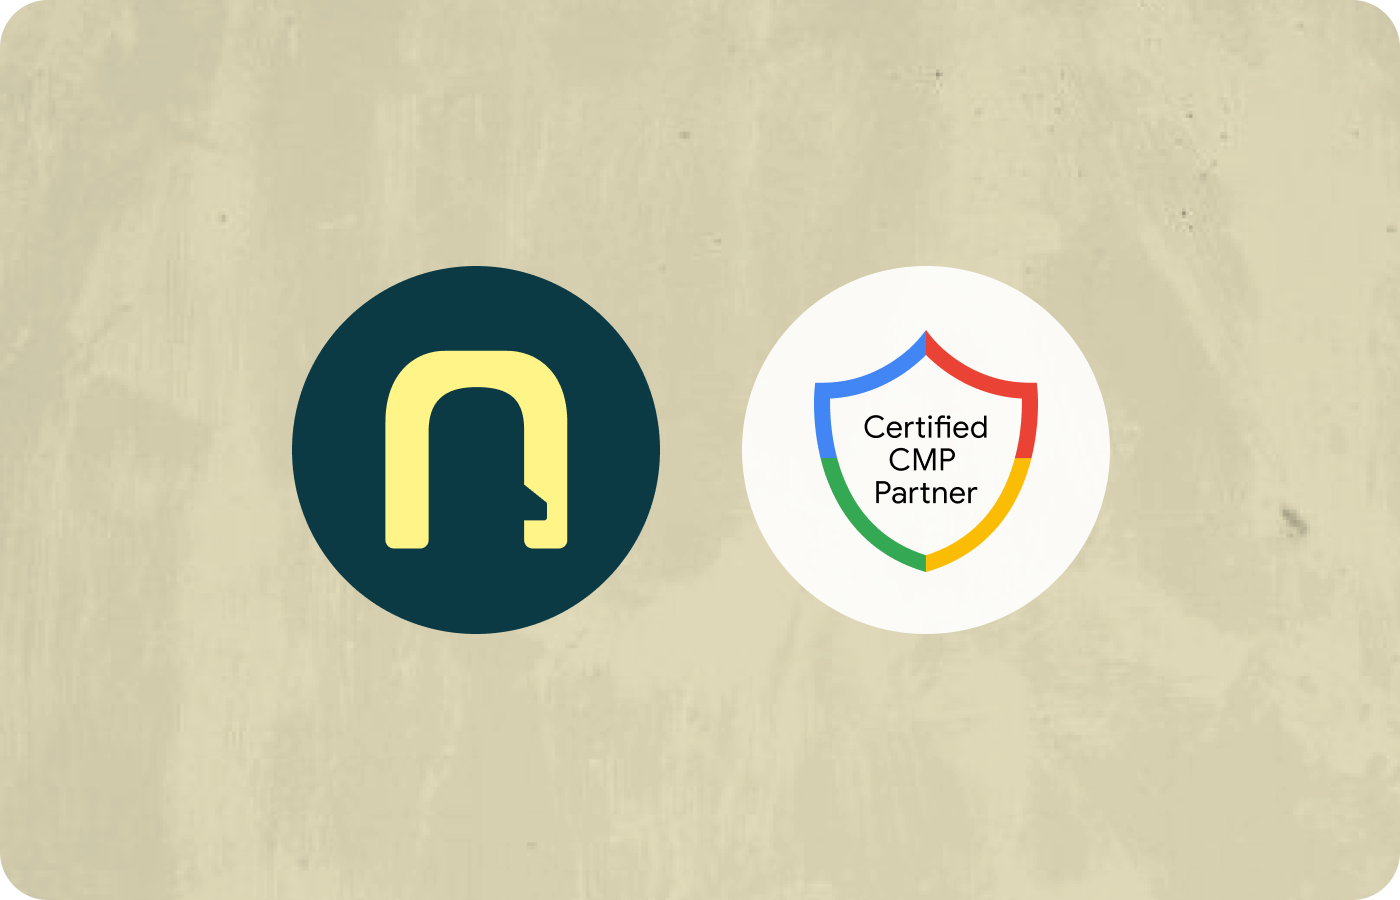 Enzuzo is a Google Certified CMP Partner.